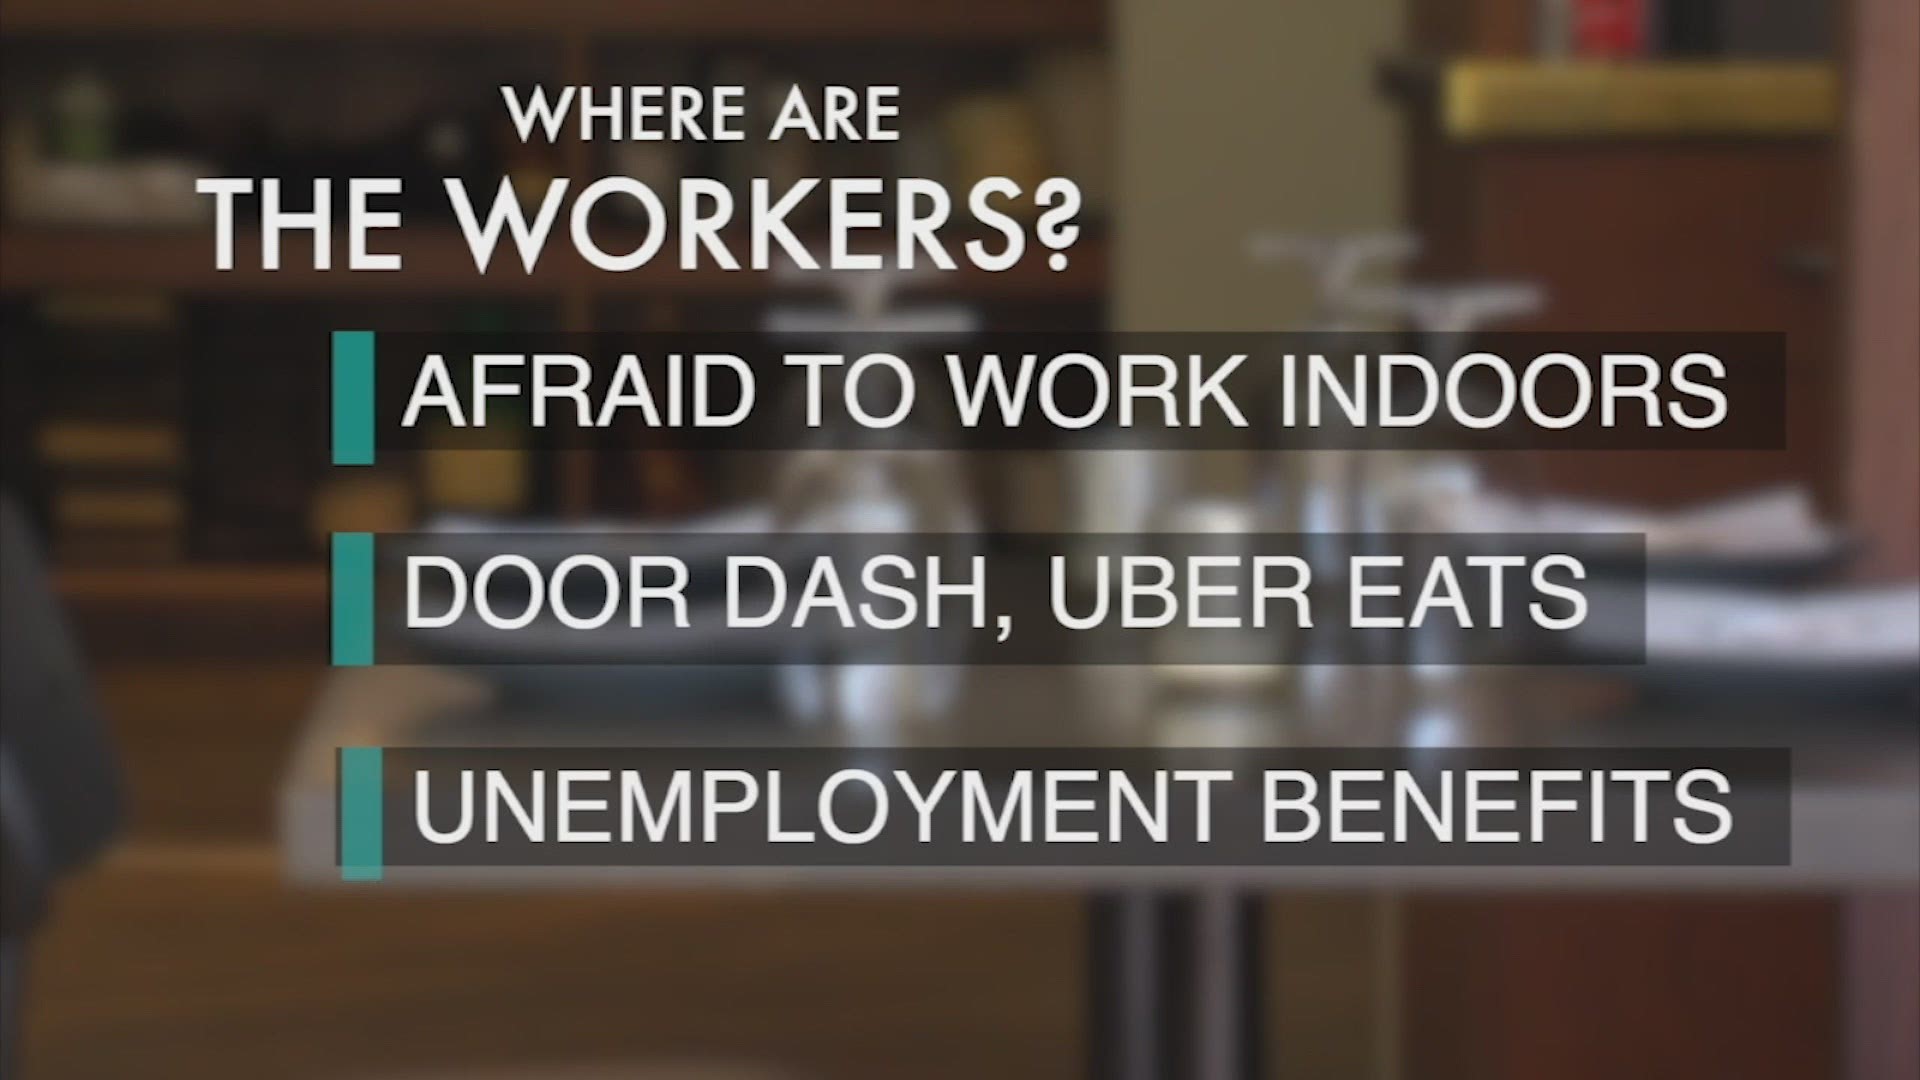 John Matarese says restaurants and companies are looking for skilled workers and boosting pay — they say it's actually hard to find people who will show up.